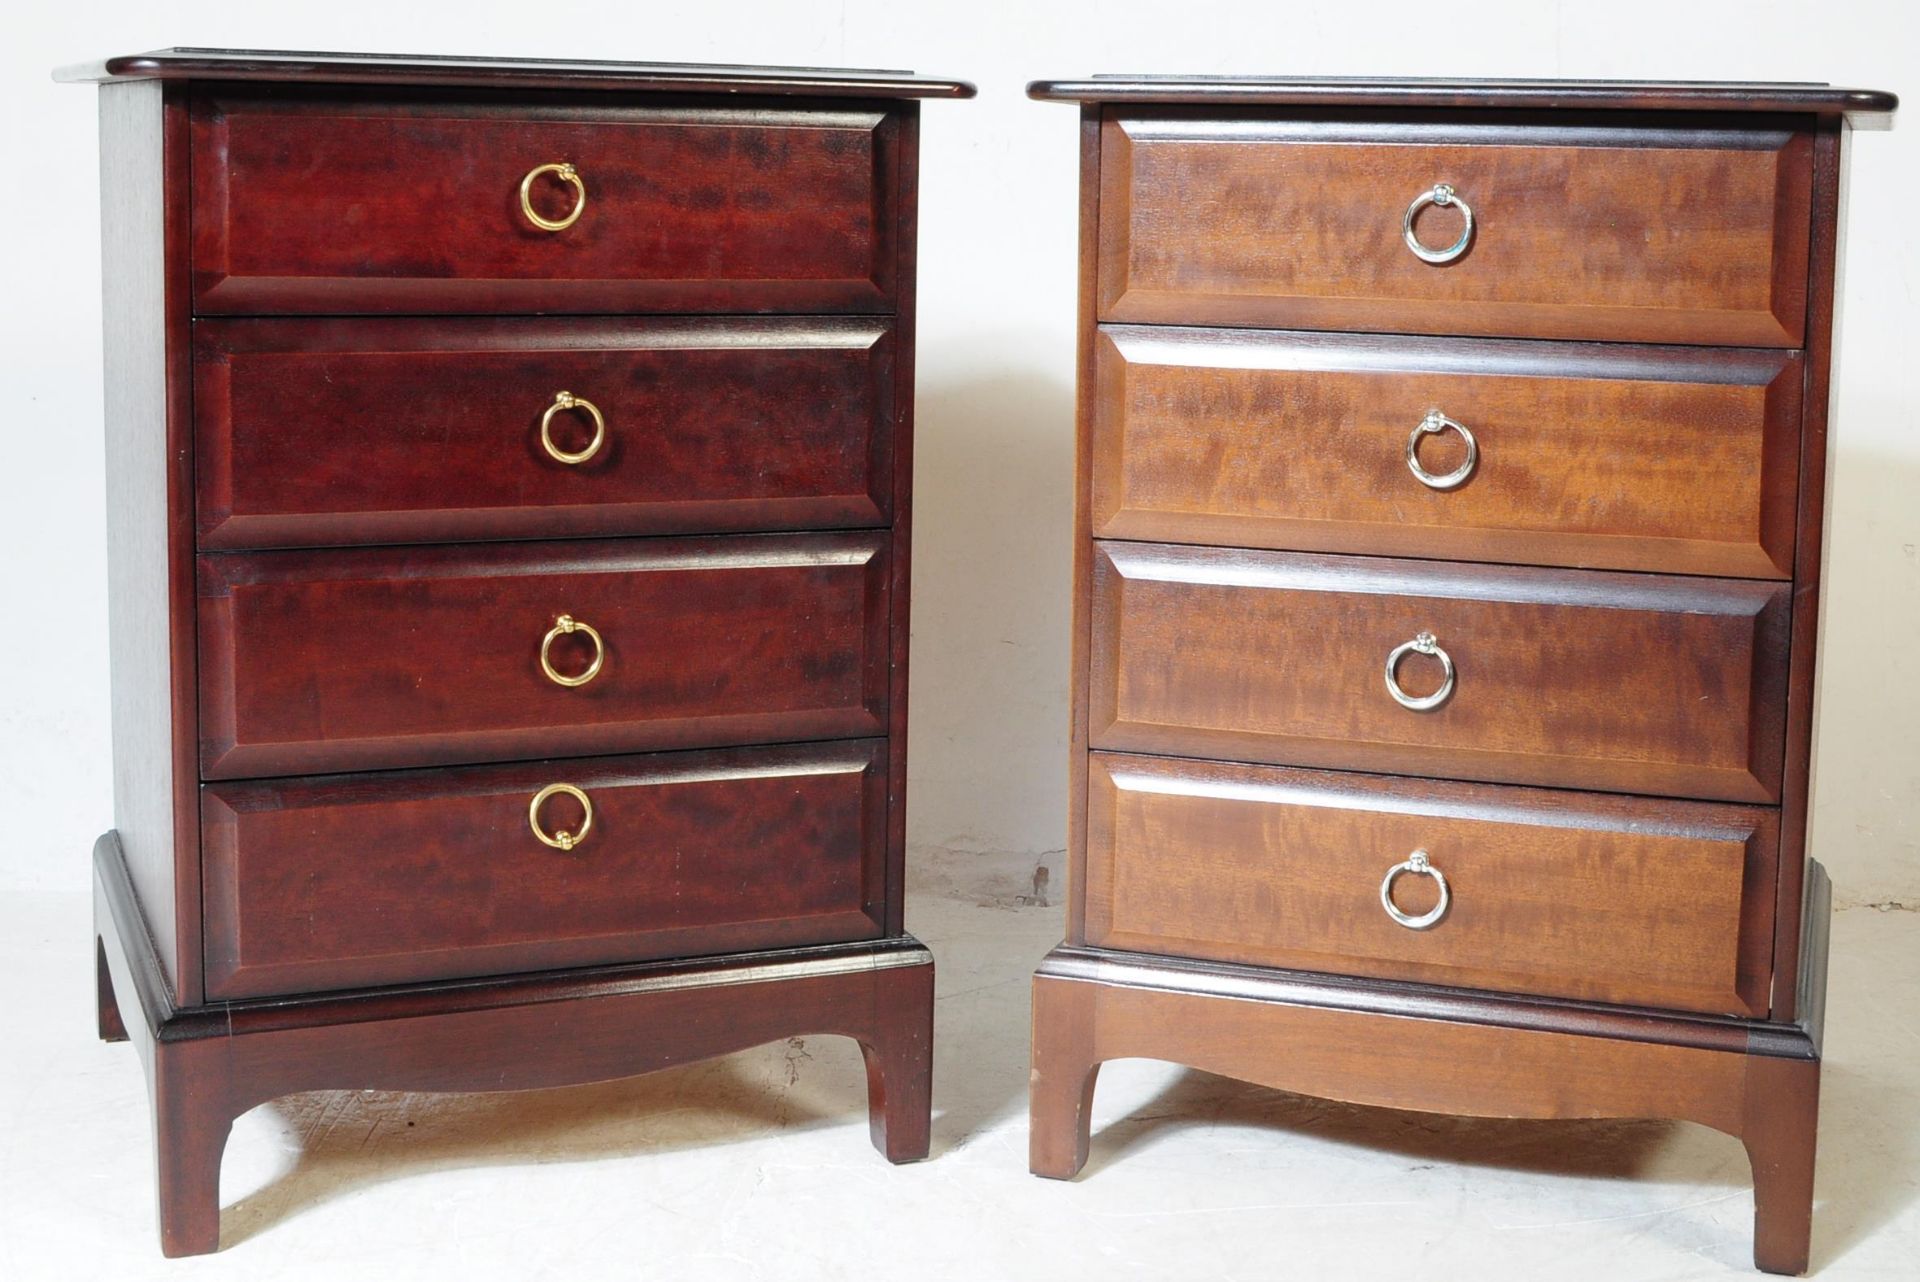 STAG FURNITURE MINSTREL PAIR OF BEDSIDE CHESTS OF DRAWERS